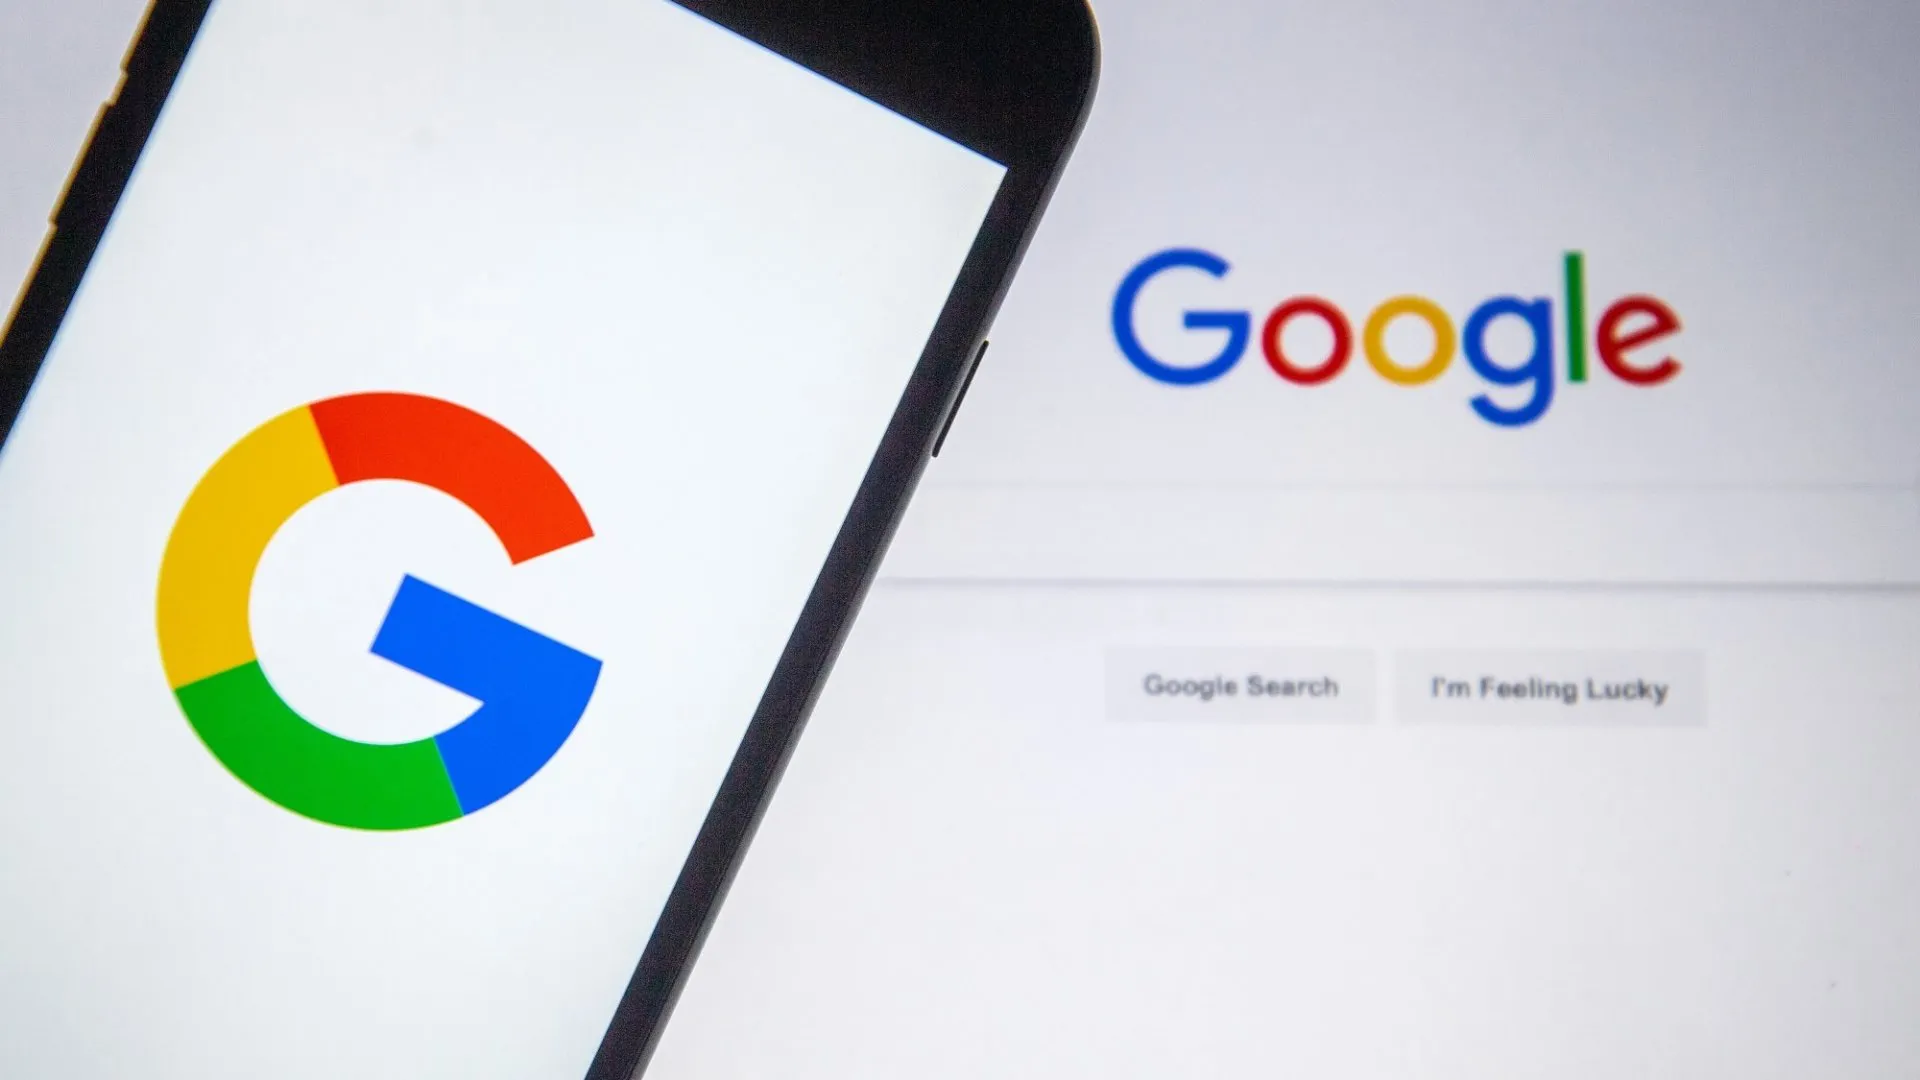 Google Just Released the Top Search Trends for 2019 and Reveals What We Care About Most | Inc.com